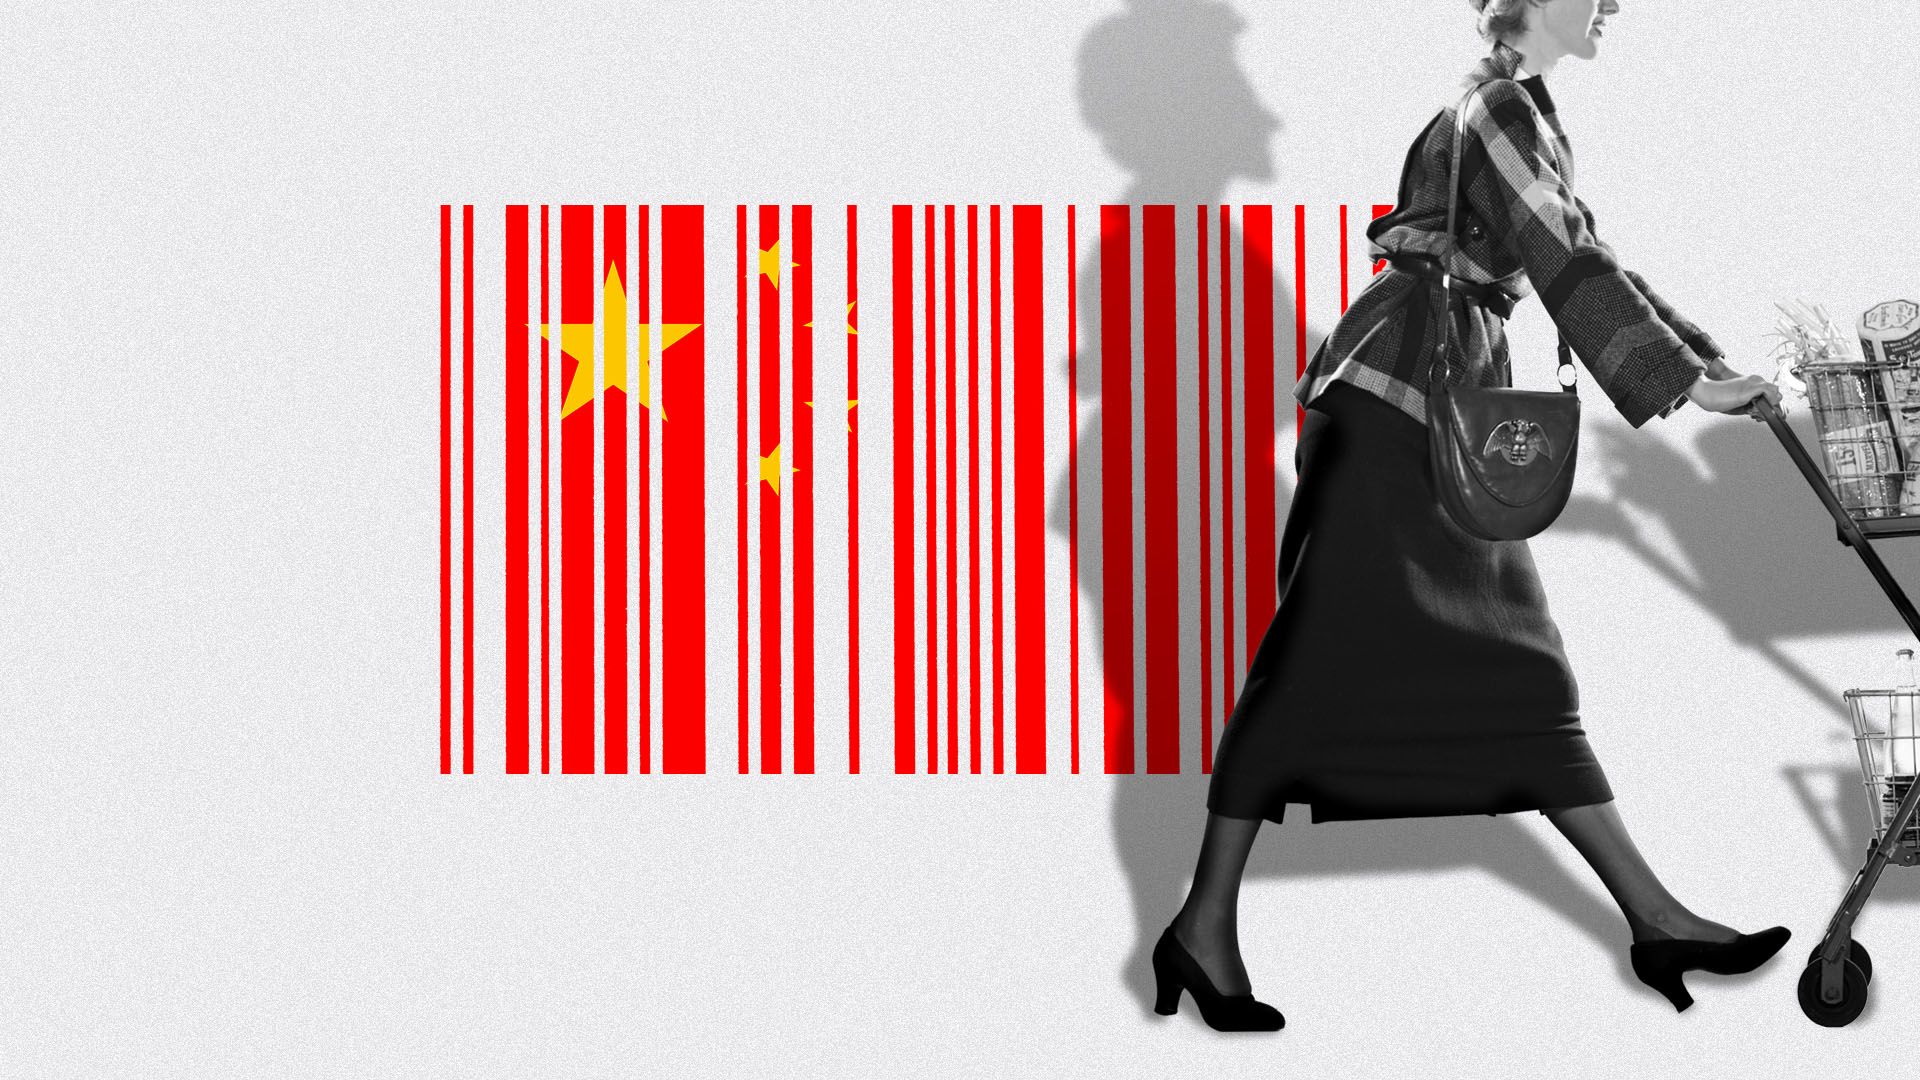 Illustration of a woman pushing a shopping cart passed a Chinese flag in the shape of a barcode